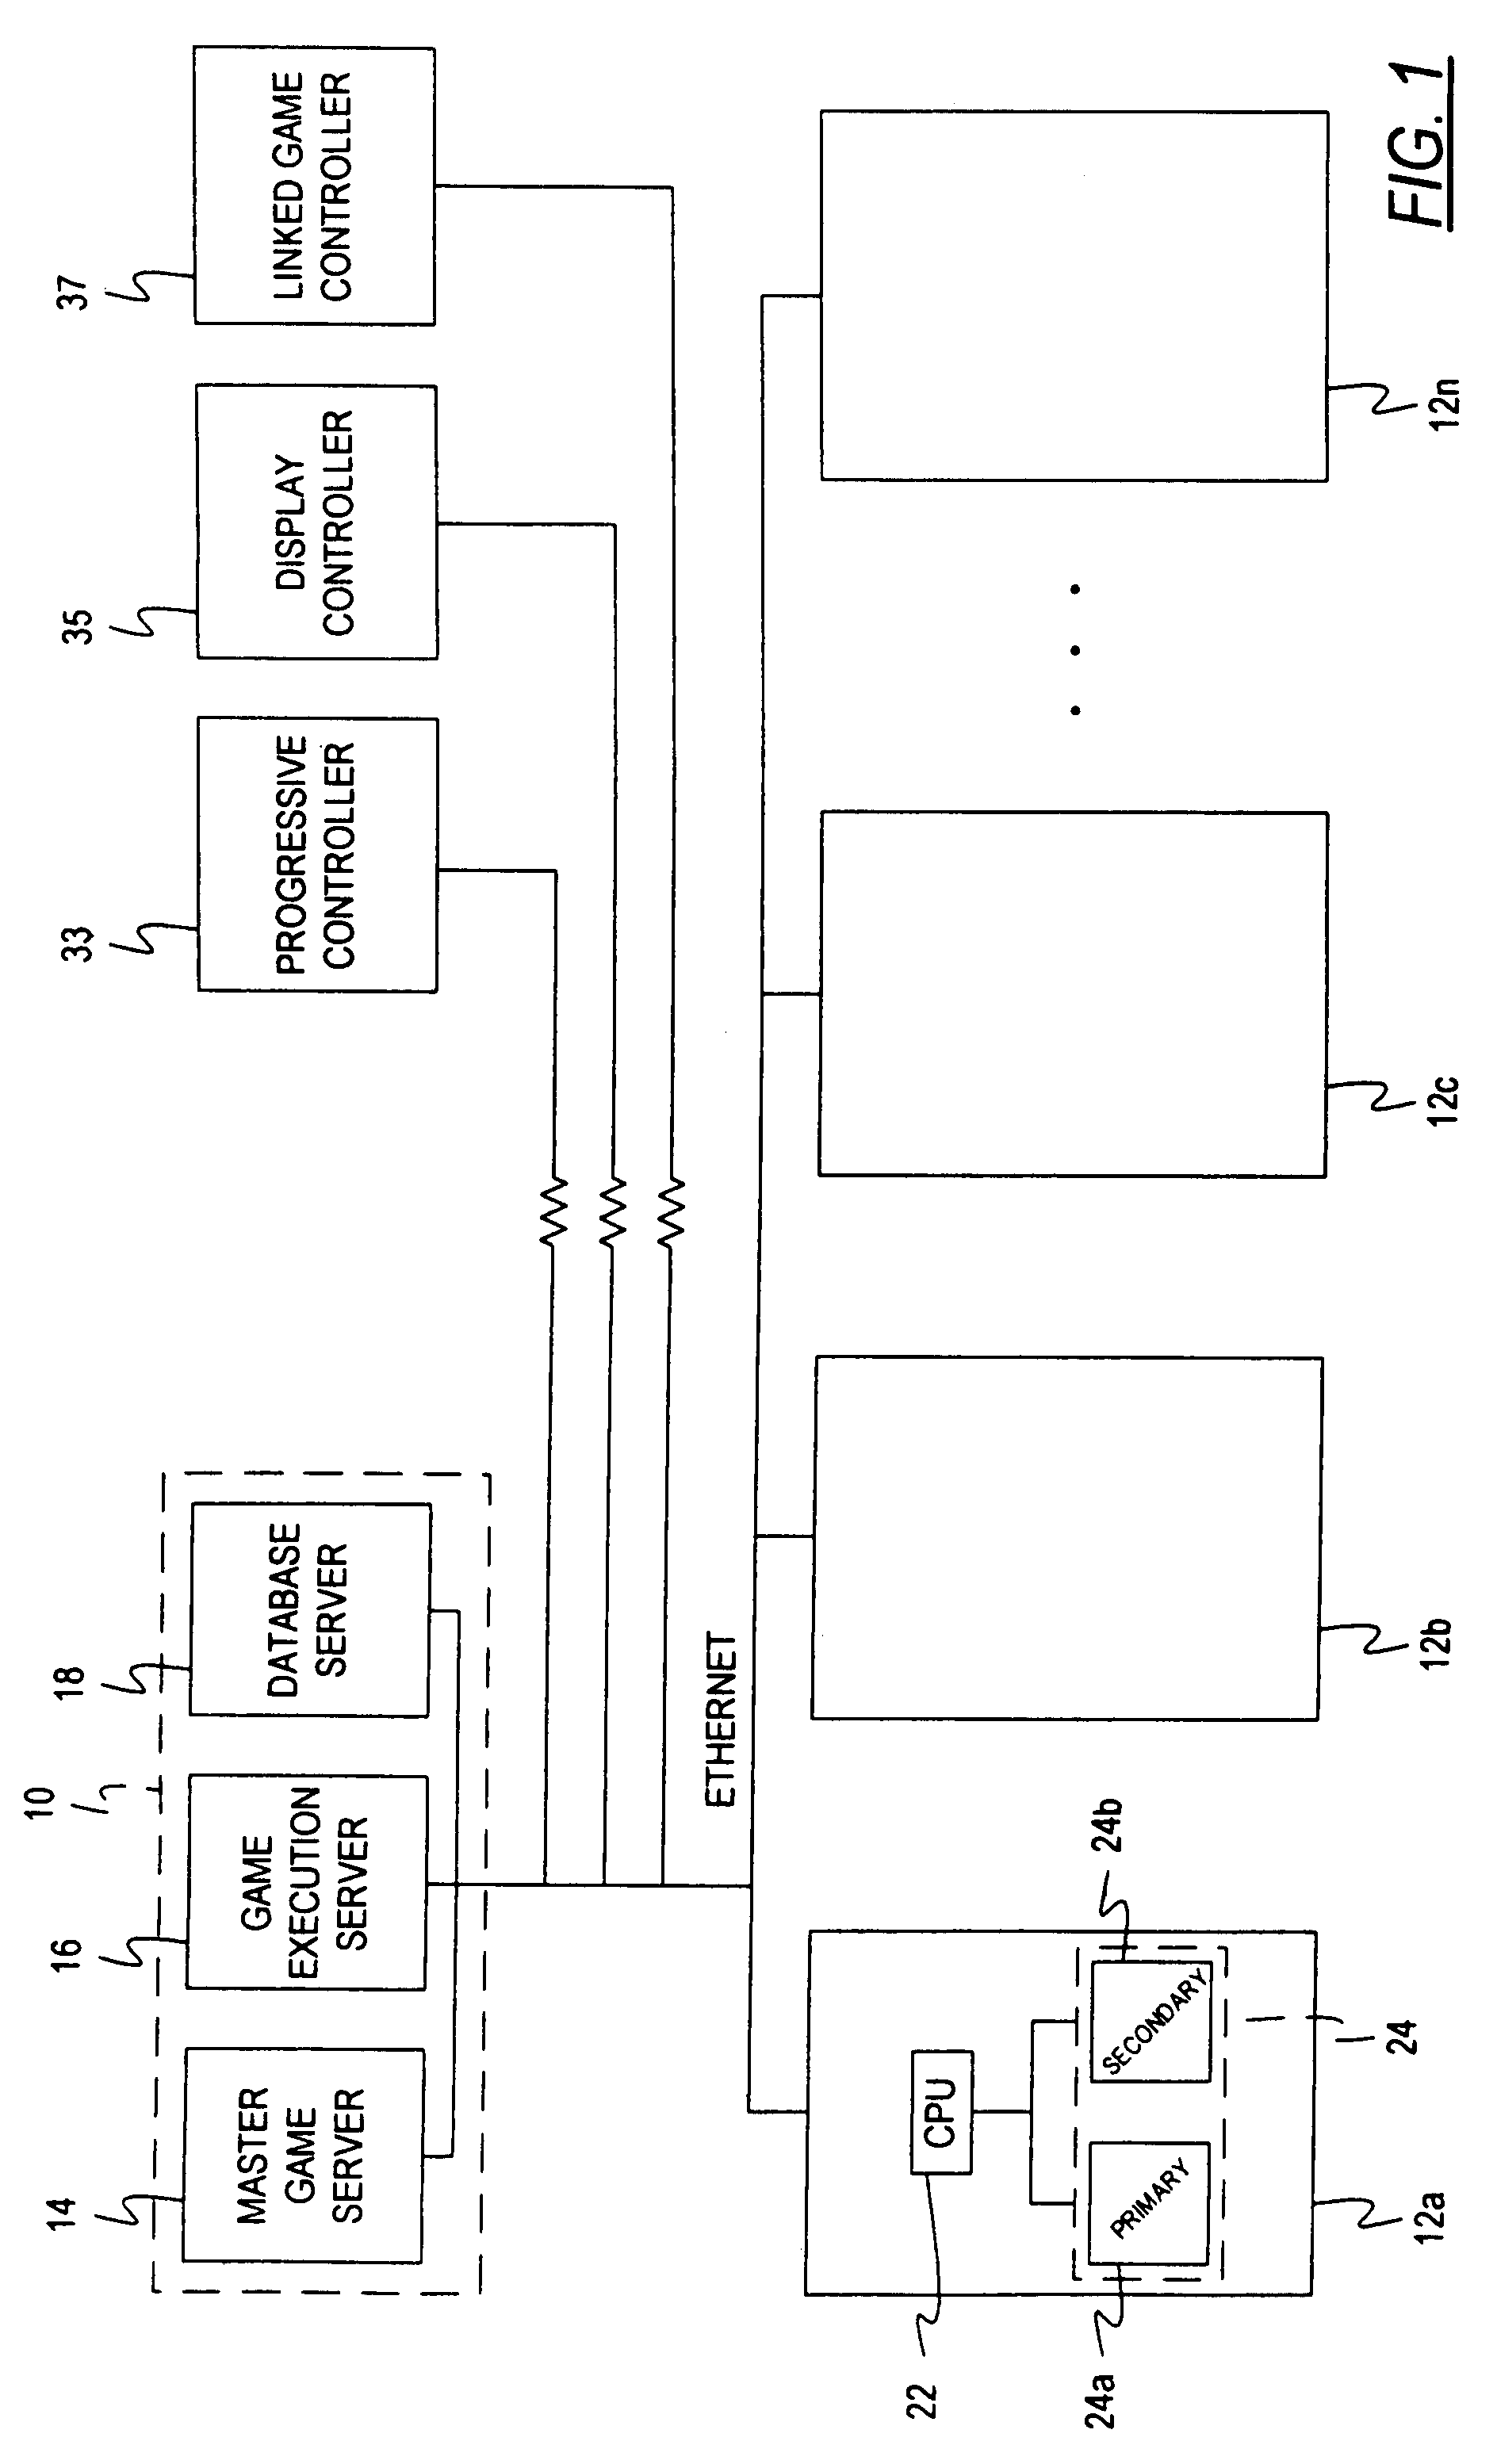 Centralized gaming system with modifiable remote display terminals